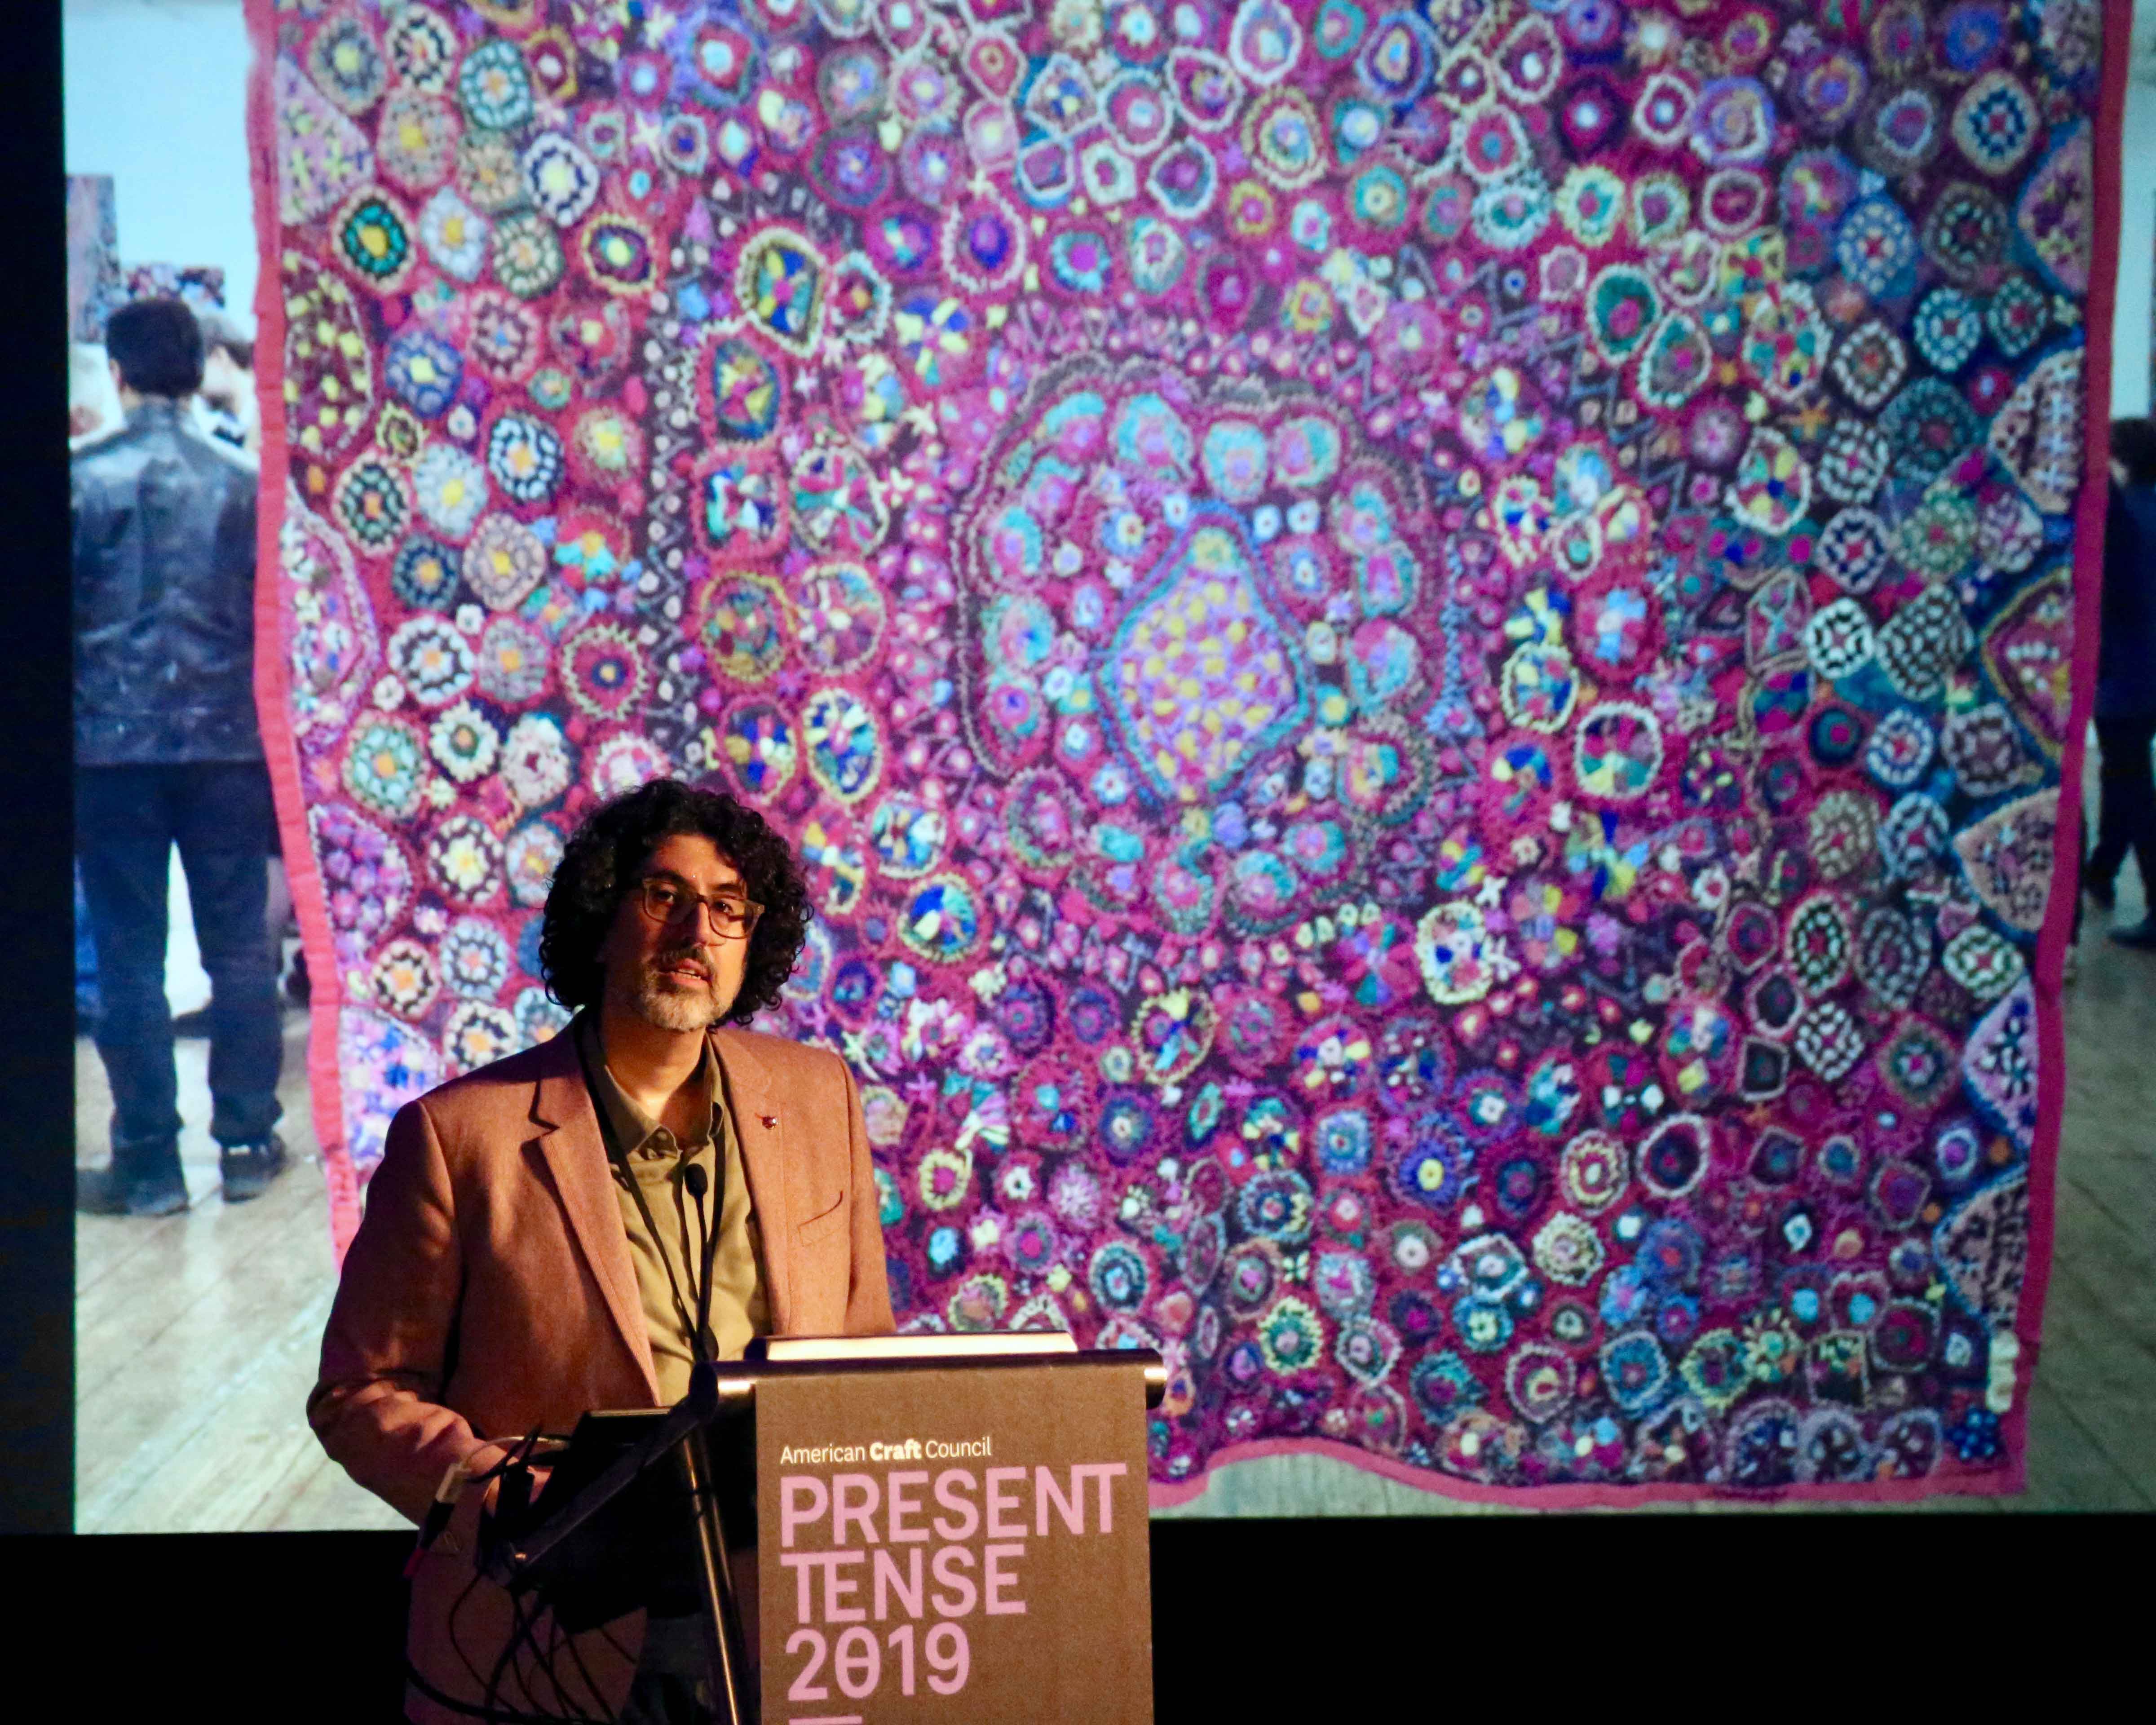 Person speaking at a podium with with an image of a colorful tapestry behind them